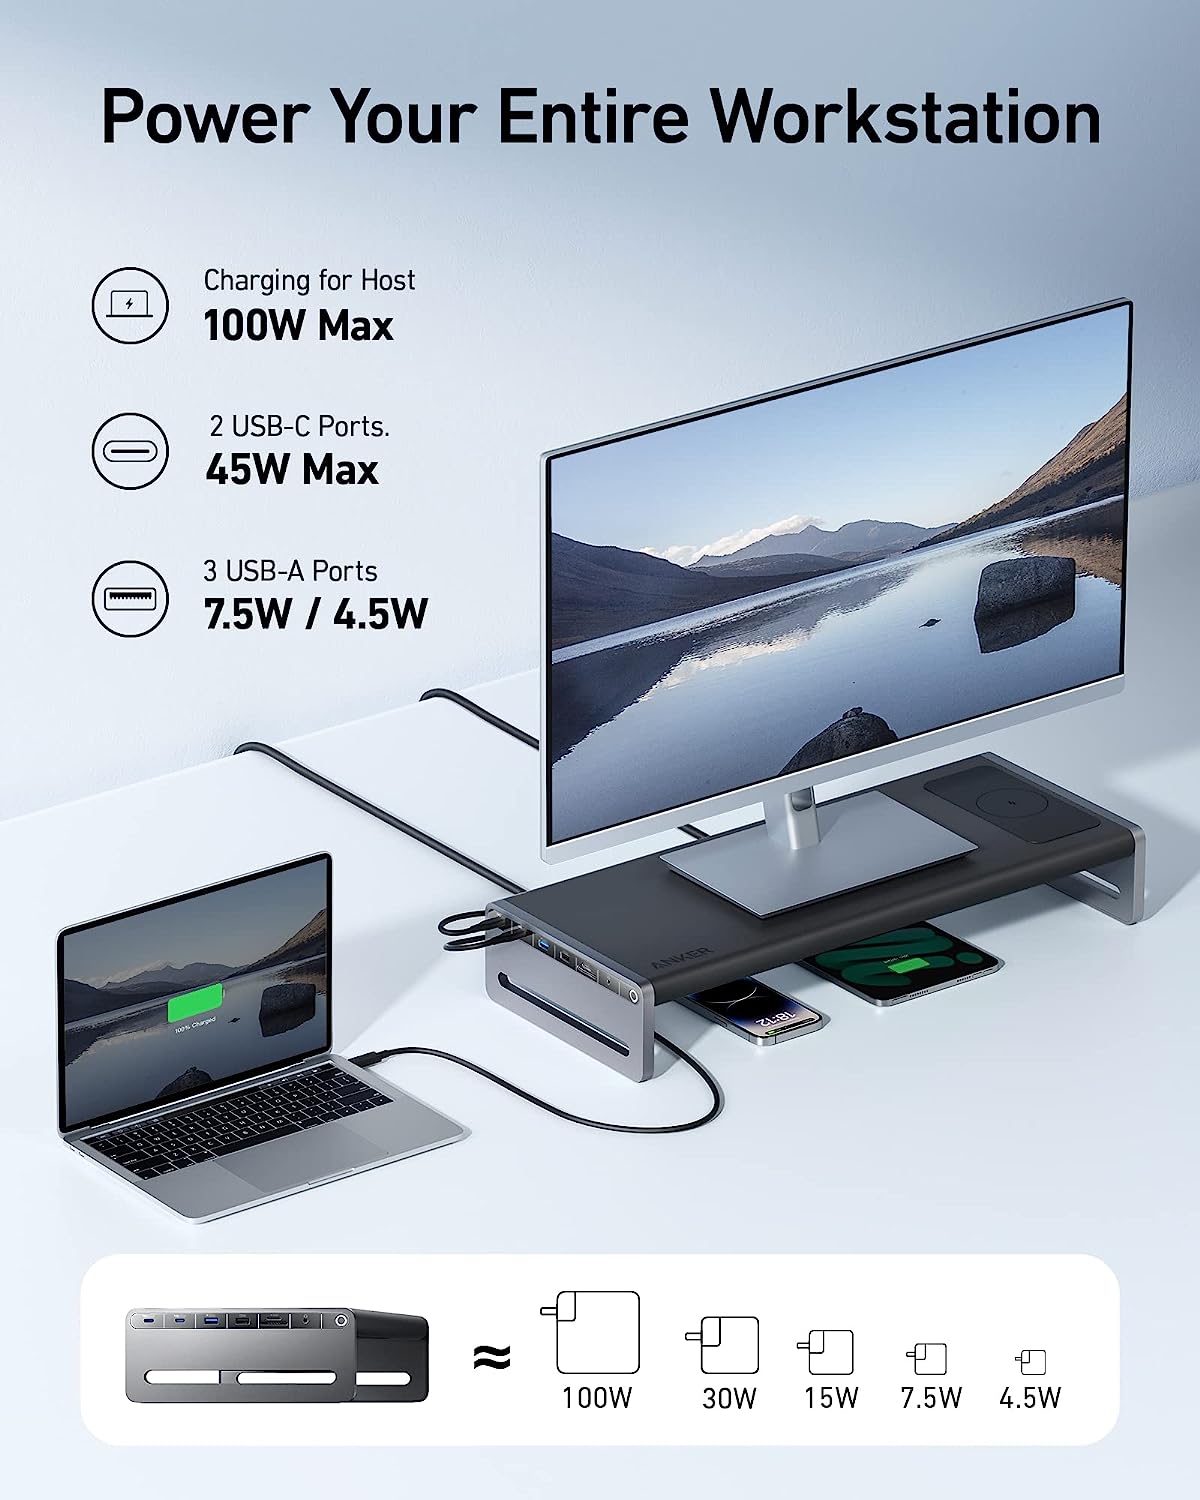 Anker 675 USB-C Docking Station (12-in-1, Monitor Stand) with 10Gbps USB-C Ports